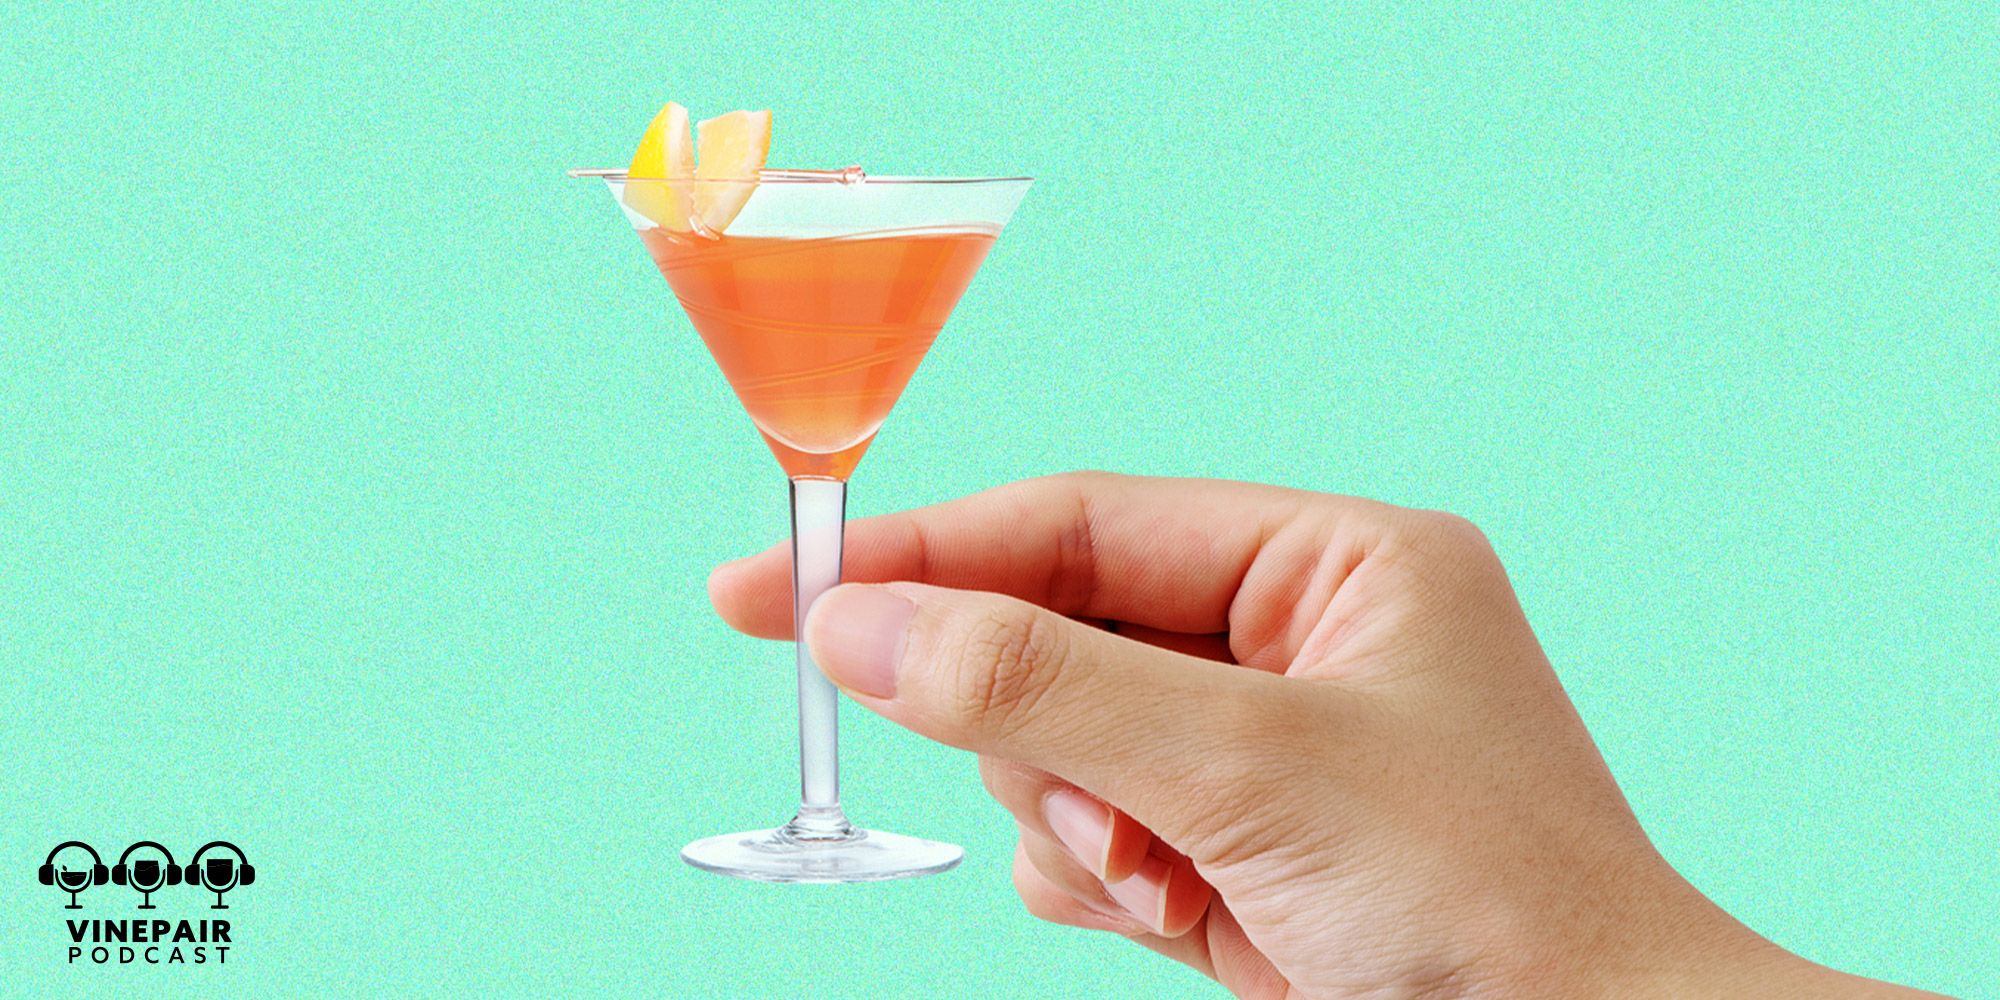 The VinePair Podcast: Is Your Cocktail Suffering From Shrinkage?